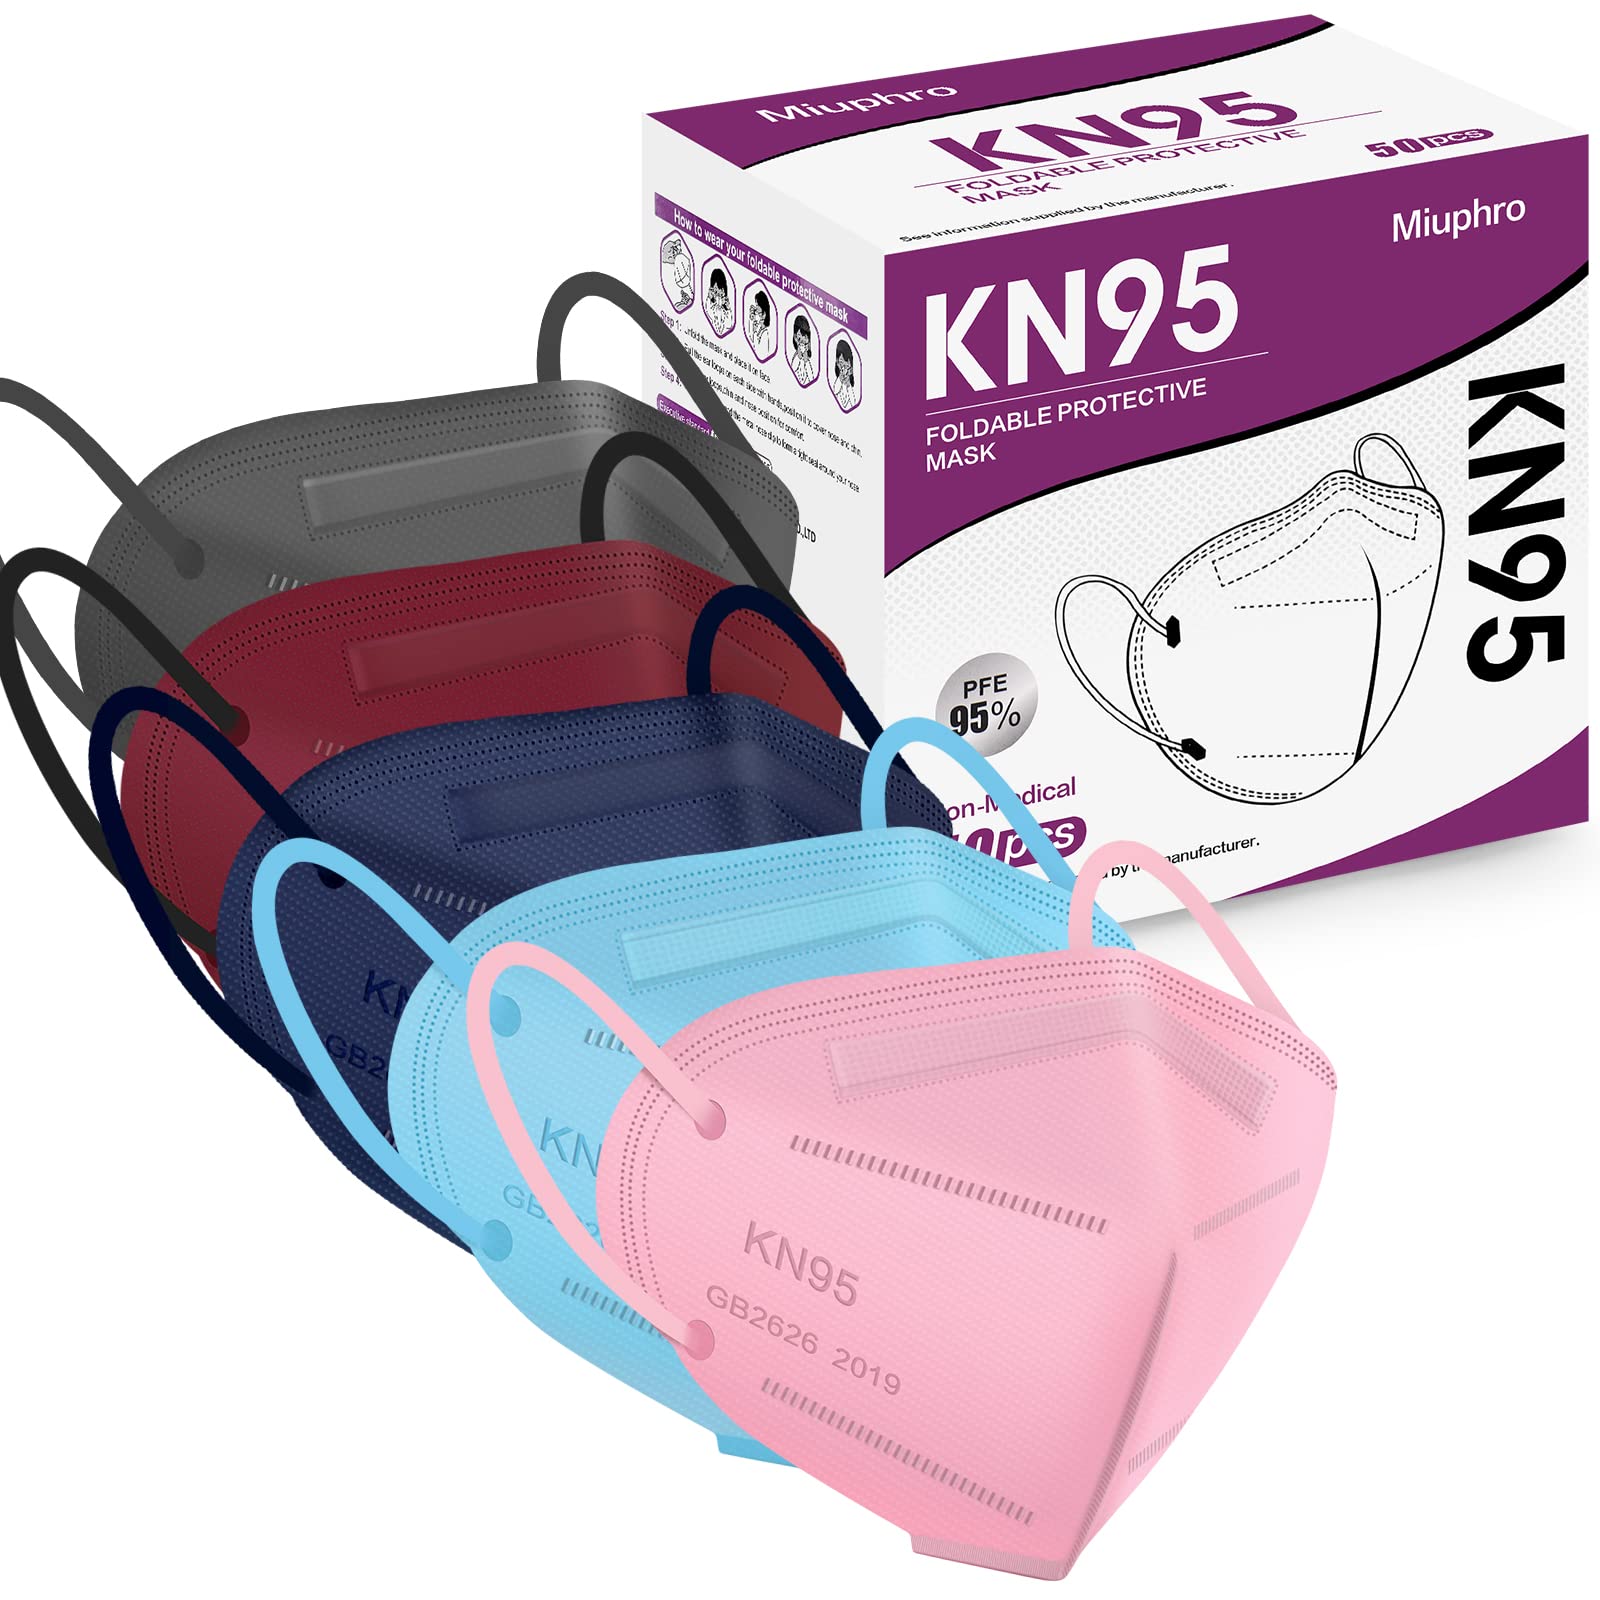 Miuphro Multiple Colour KN95 Face Mask 50 PCs, 5 Layers Safety KN95 Masks, Disposable Masks Respirator for Outdoor(Pink,Blue,Red,Purlpe,Grey)